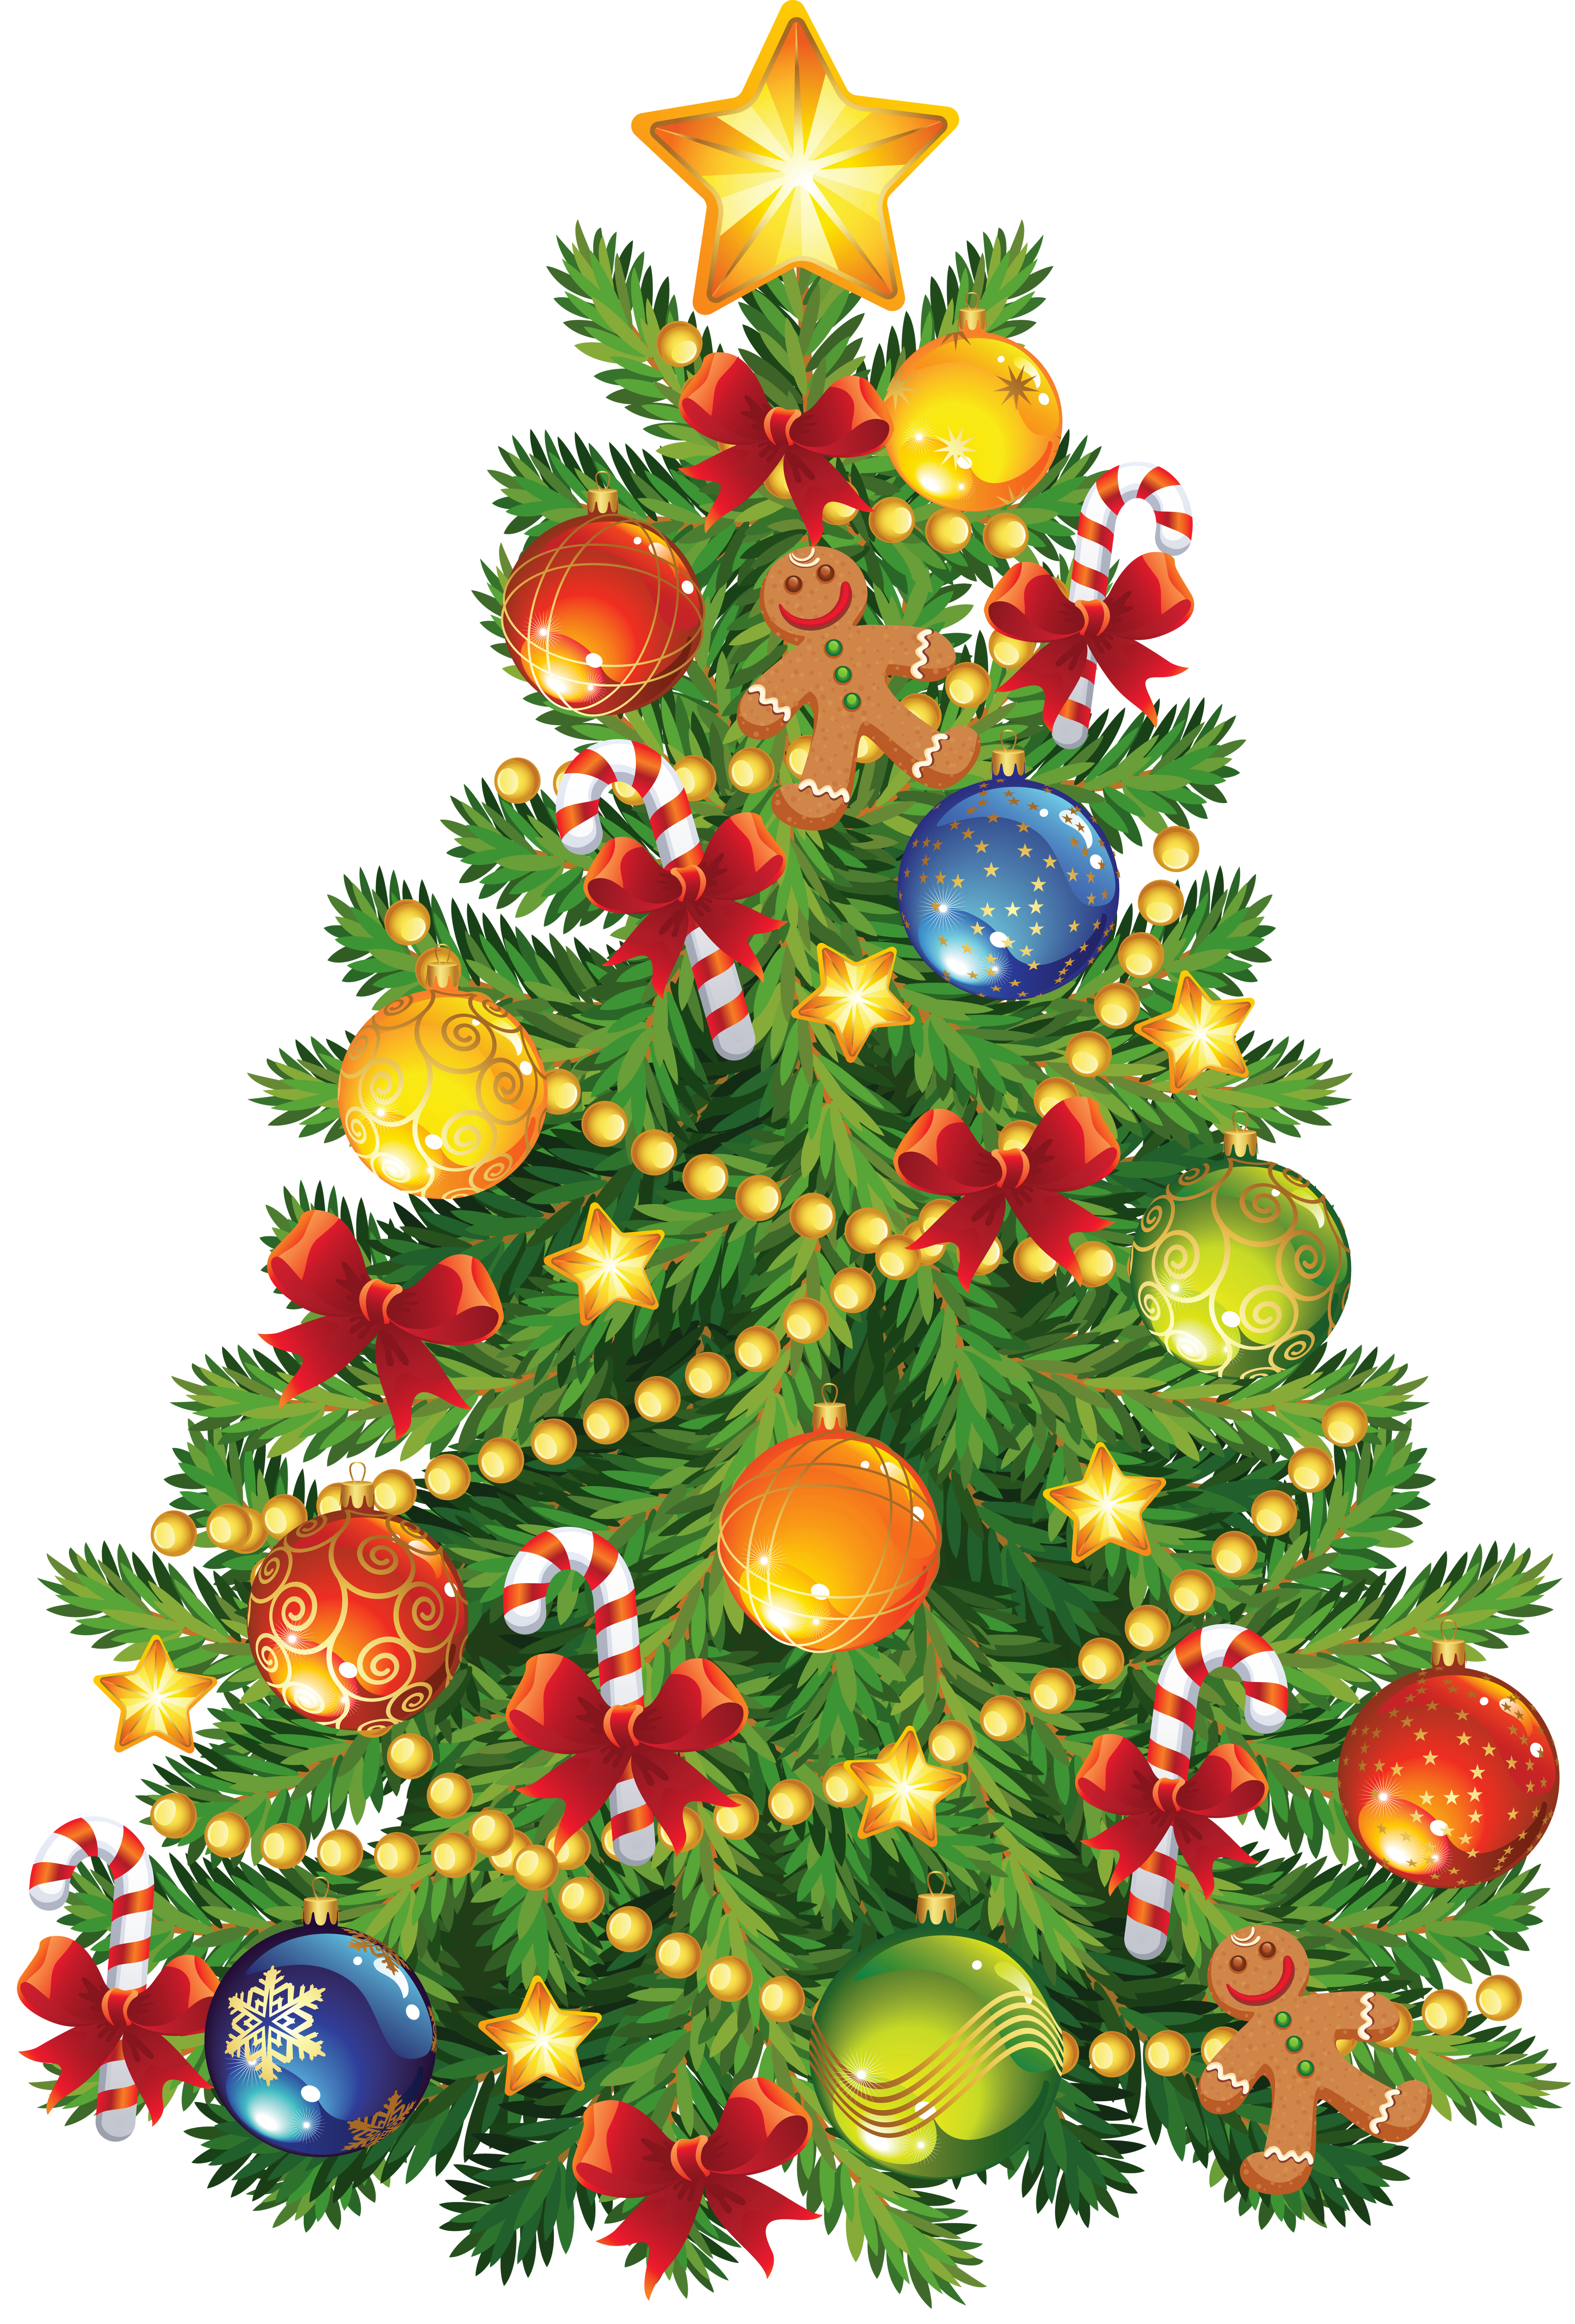 A Christmas tree with red bul